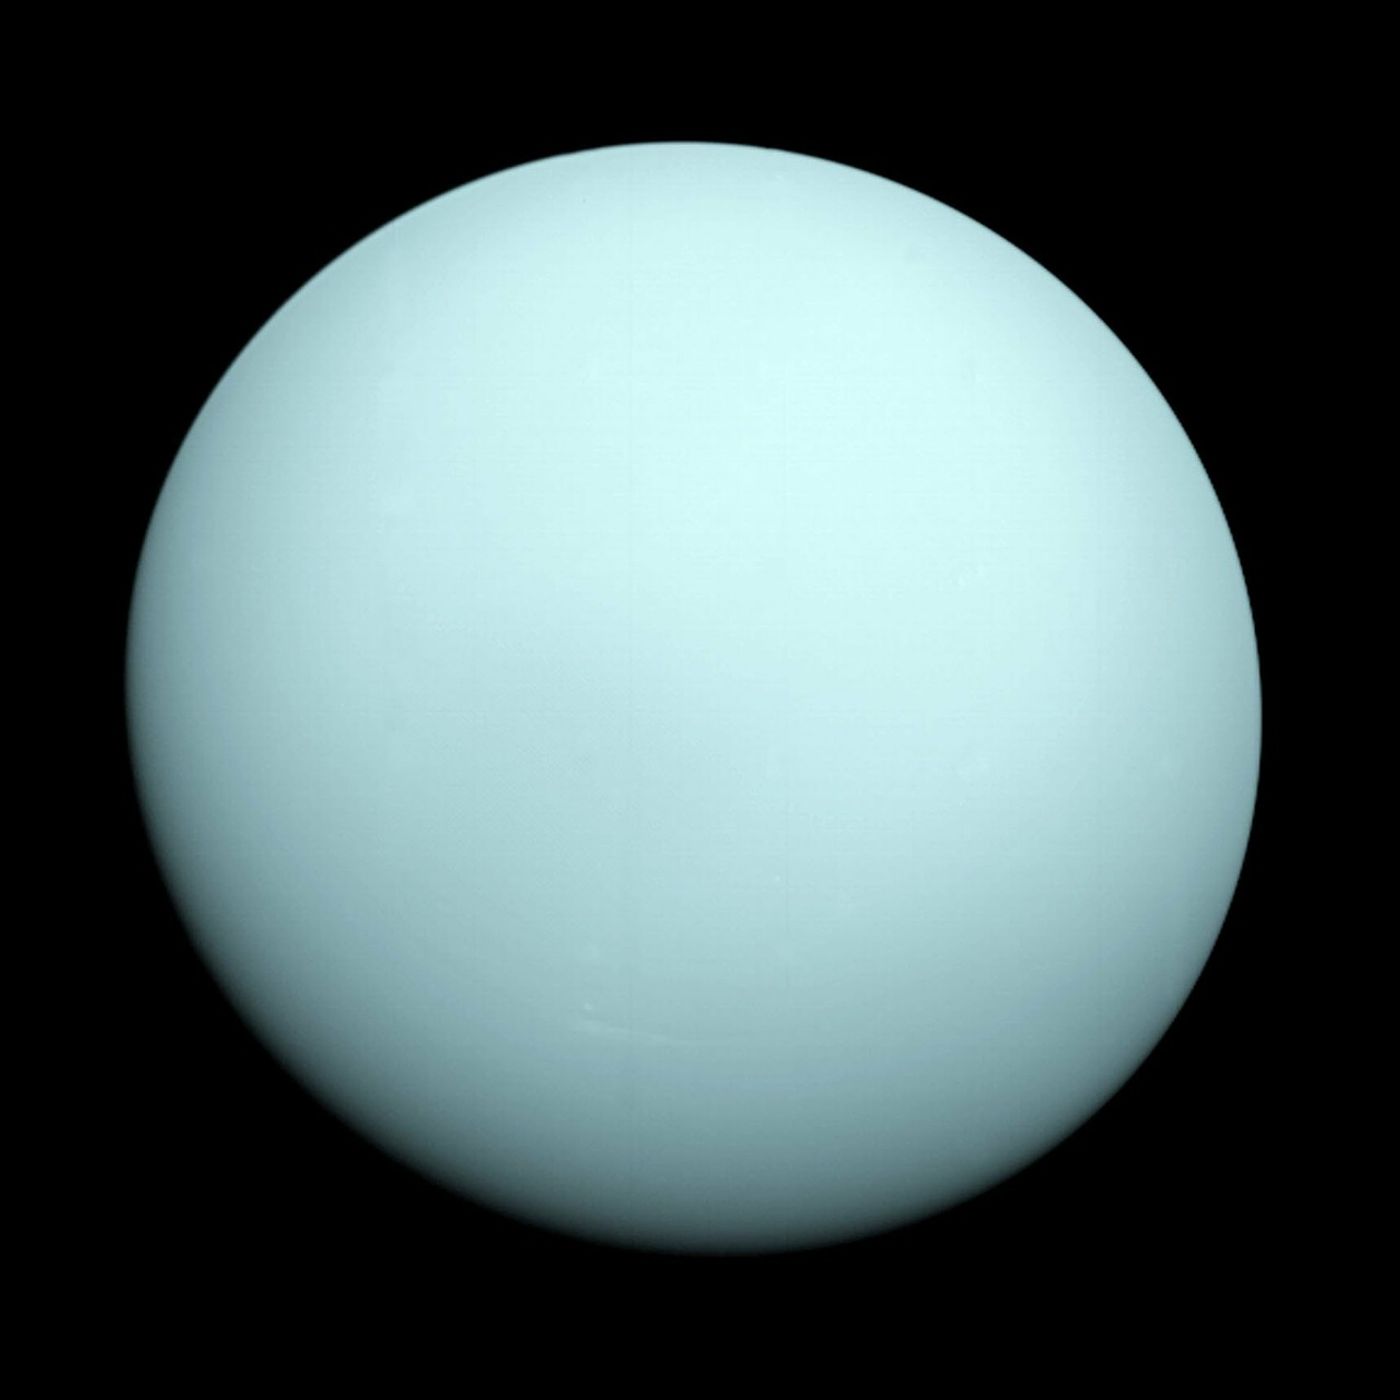 Uranus is a very bland-looking planet, but its clouds probably don't smell that great.